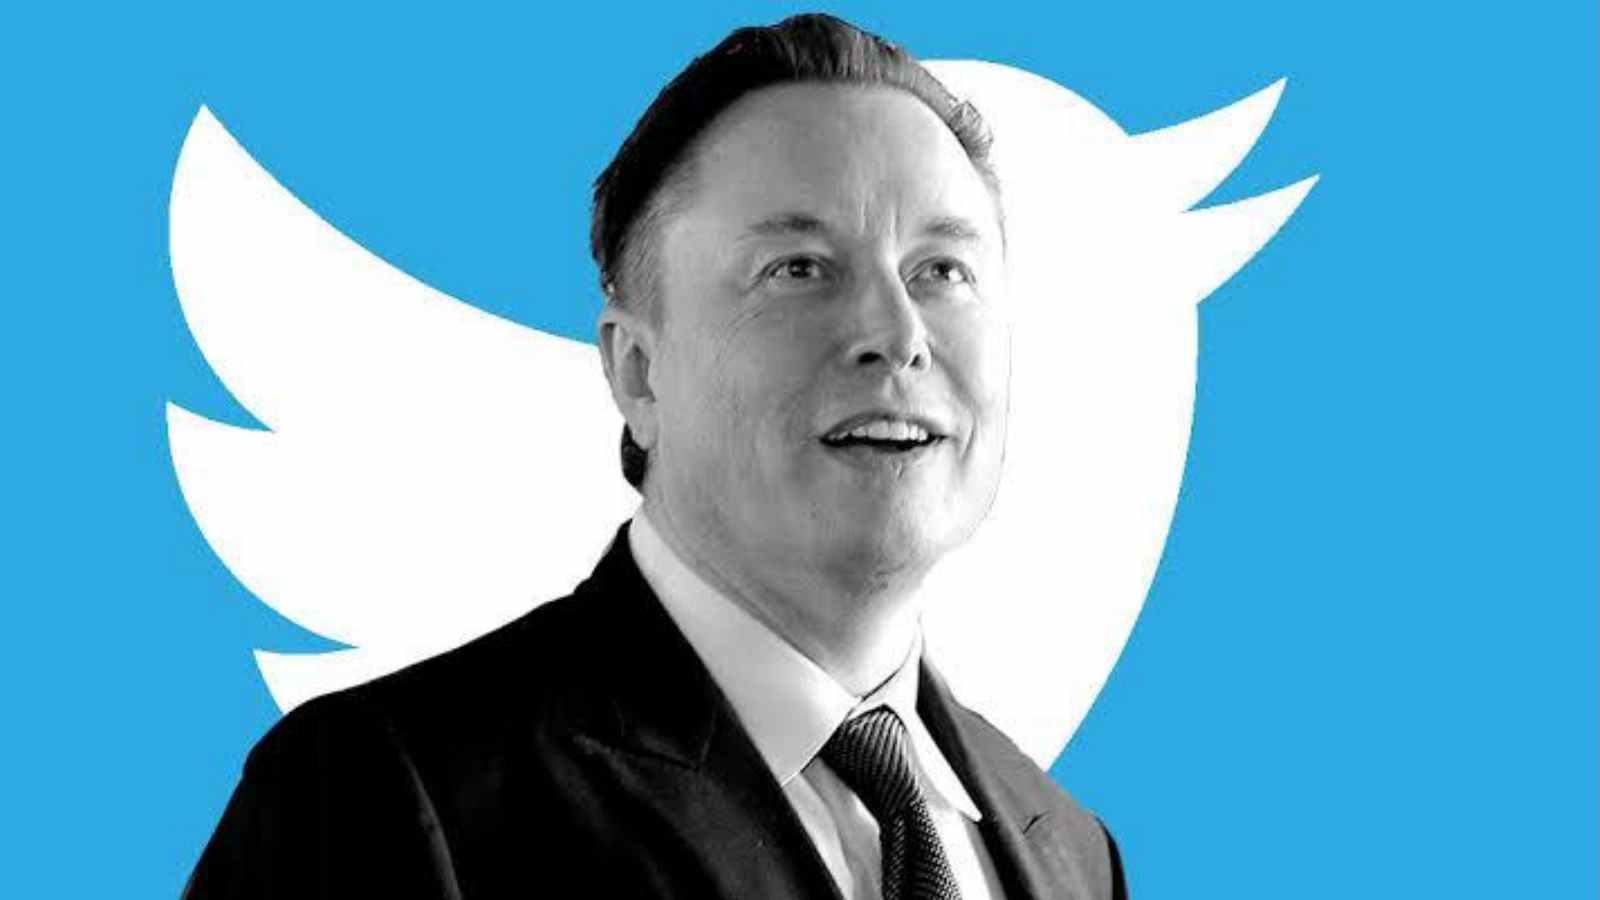 Twitter Files A Lawsuit To Force Musk